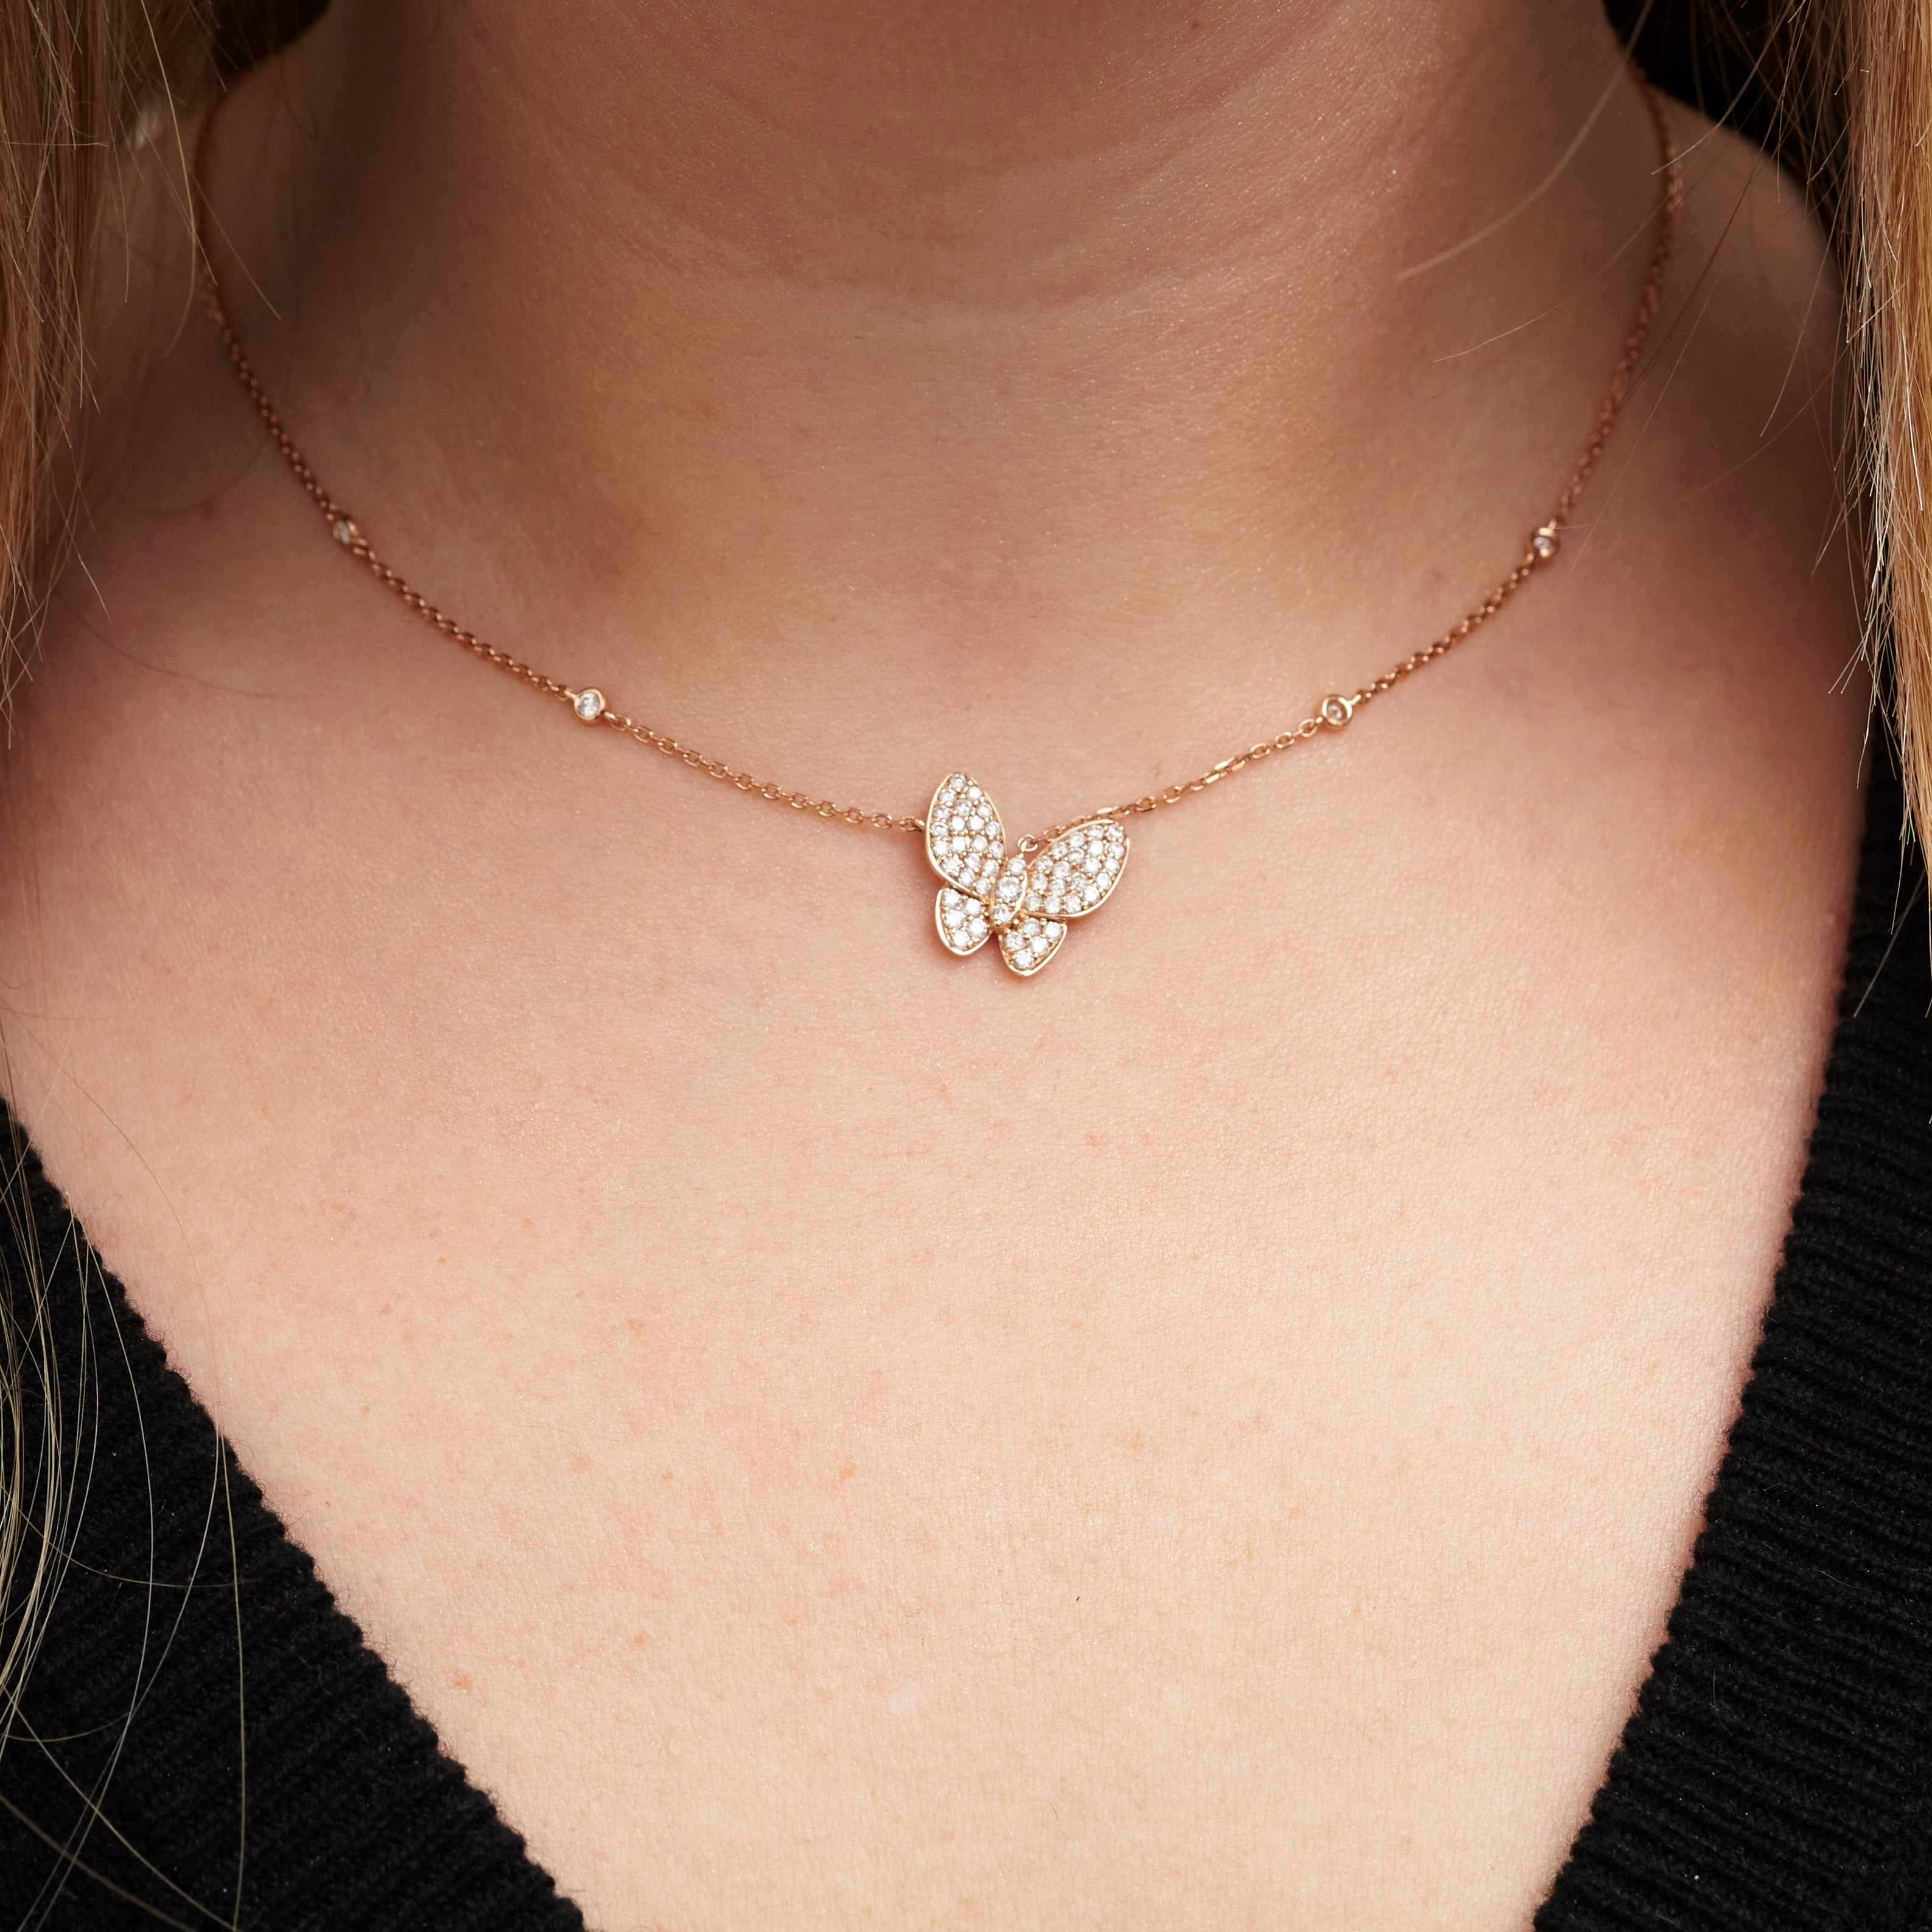 The Butterfly Kisses Necklace